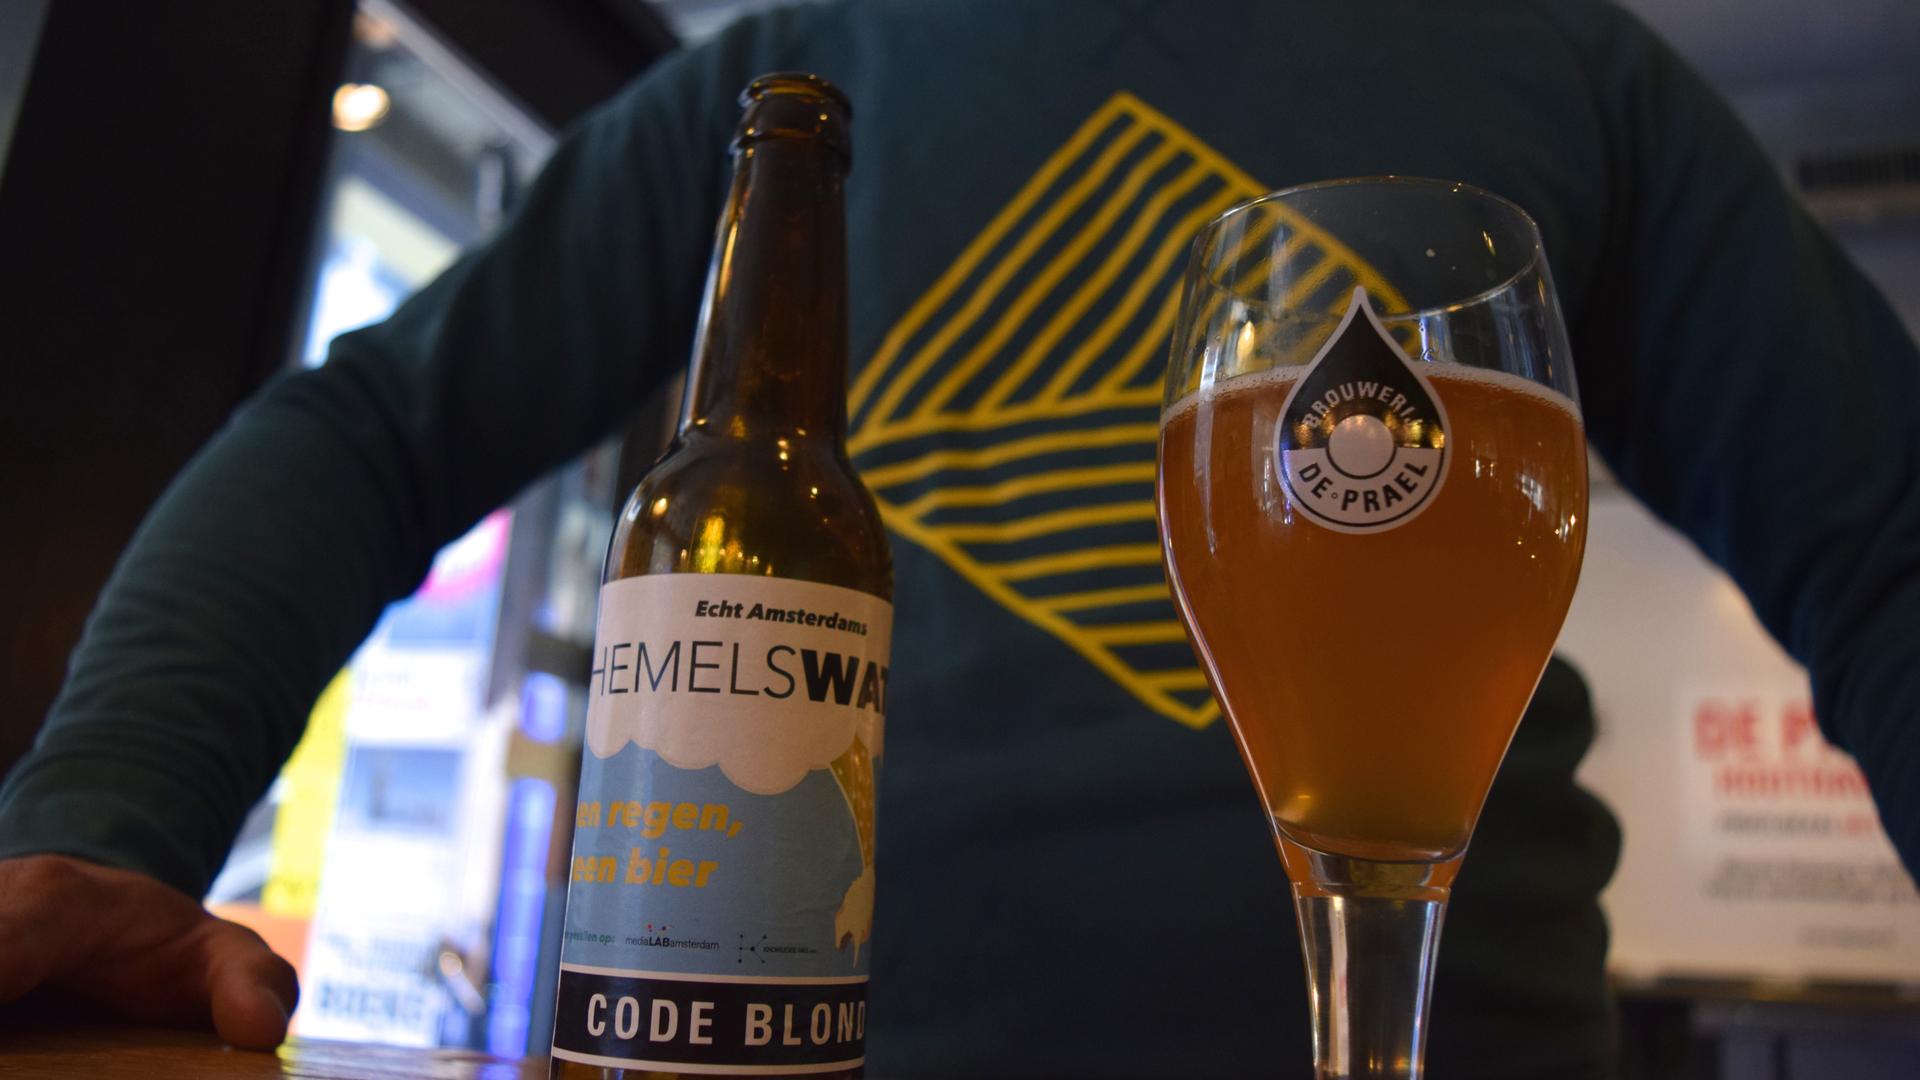 From the rooftop to the bottle: Joris Hoebe's Hemelswater beer (“Heaven’s water”) is part of a citywide effort to control flooding in Amsterdam.